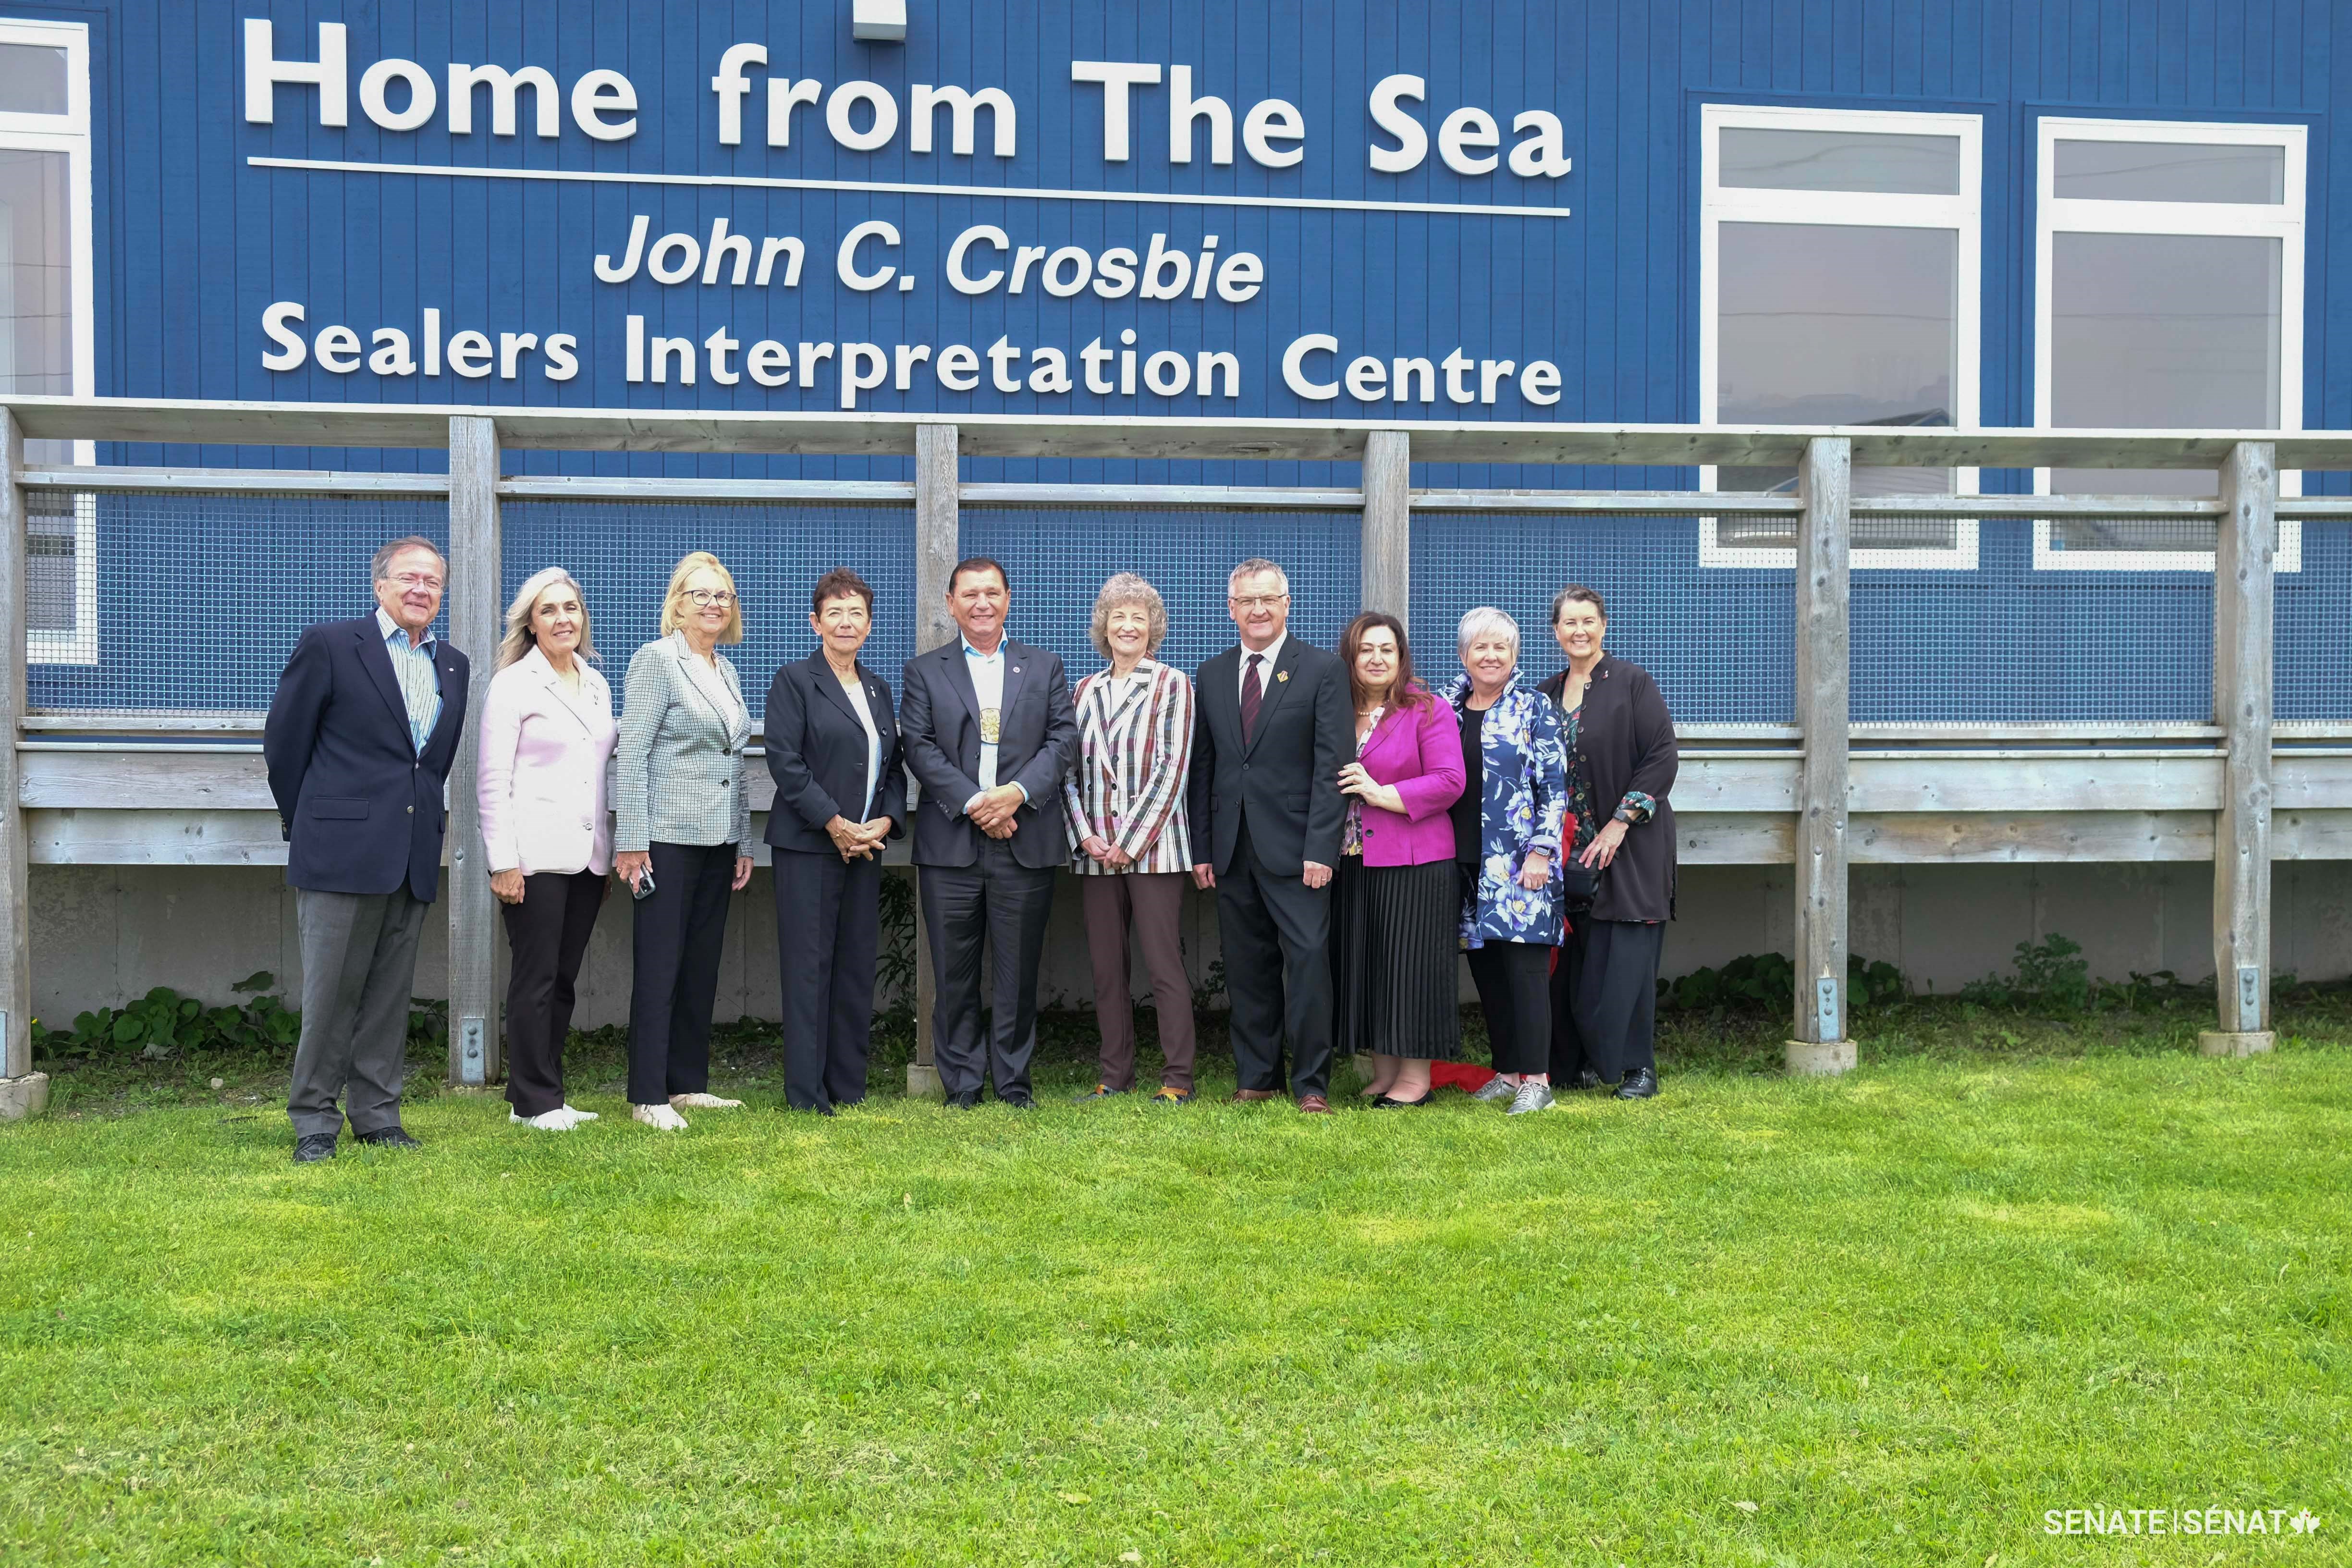 A delegation of the Senate Committee on Fisheries and Oceans kicks off its fact-finding mission to Newfoundland and Labrador with a visit to the John C. Crosbie Sealers Interpretation Centre in Elliston, a historic fishing town and settlement. From left, senators Jim Quinn, Rebecca Patterson, Jane Cordy, Bev Busson, Brian Francis, Pat Duncan, Fabian Manning, Salma Ataullahjan, Iris Petten and Marilou McPhedran.